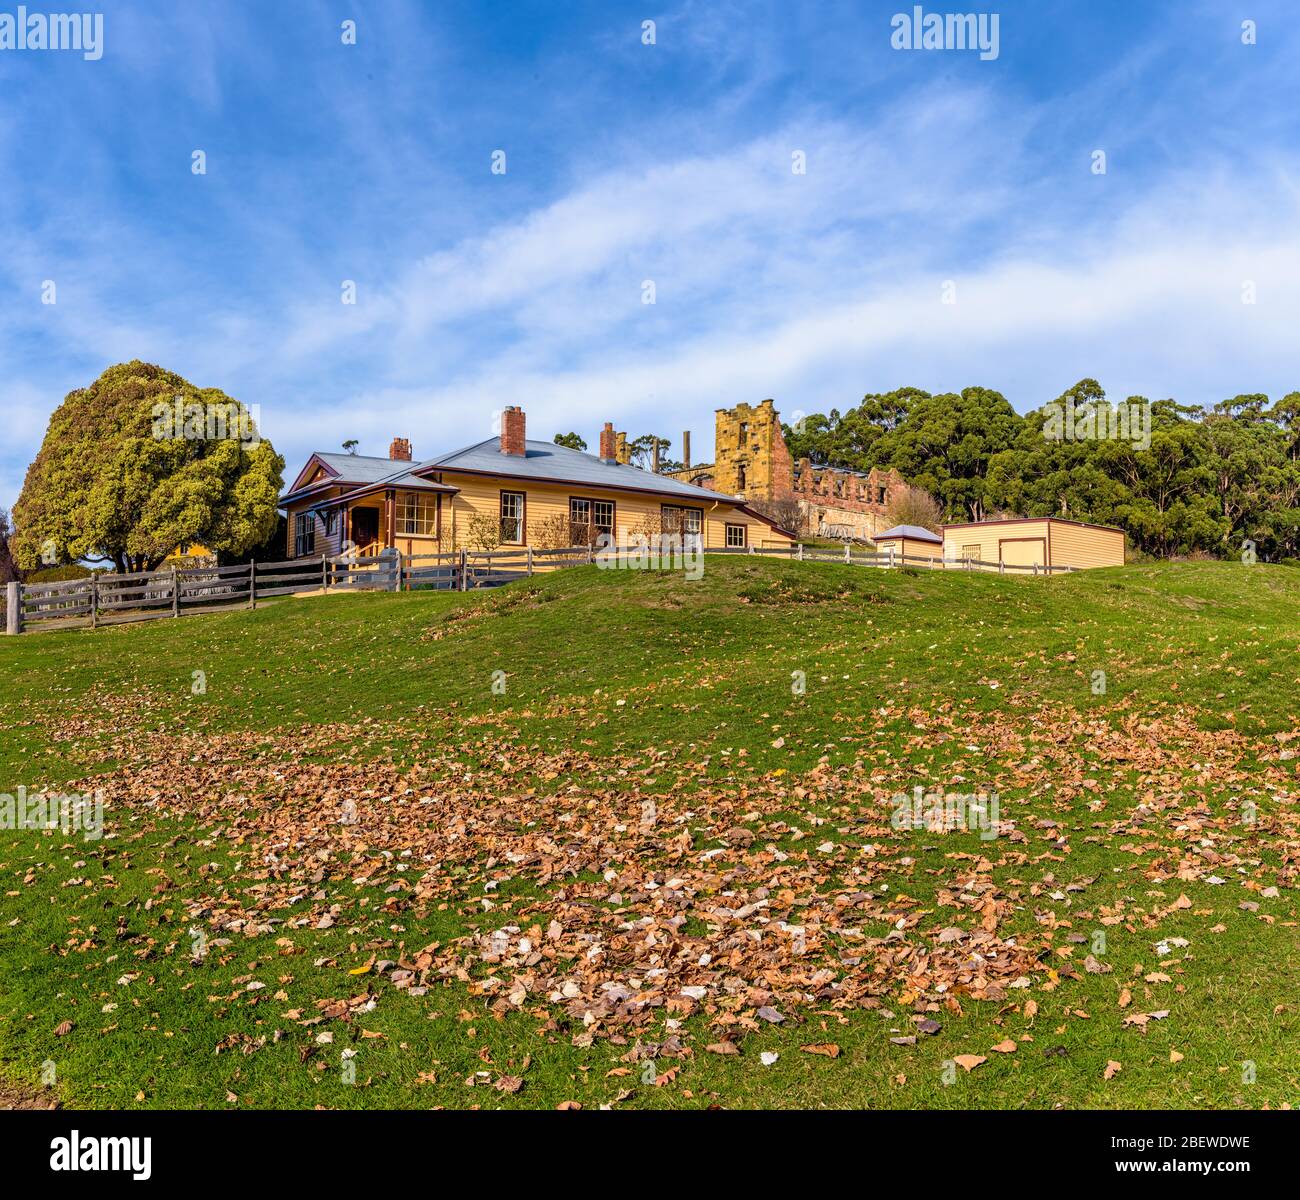 Foreground grassy paddock with fallen leaves leading to the Canadian Cottage Port Arthur Historical site in Tasmania Australia. Stock Photo